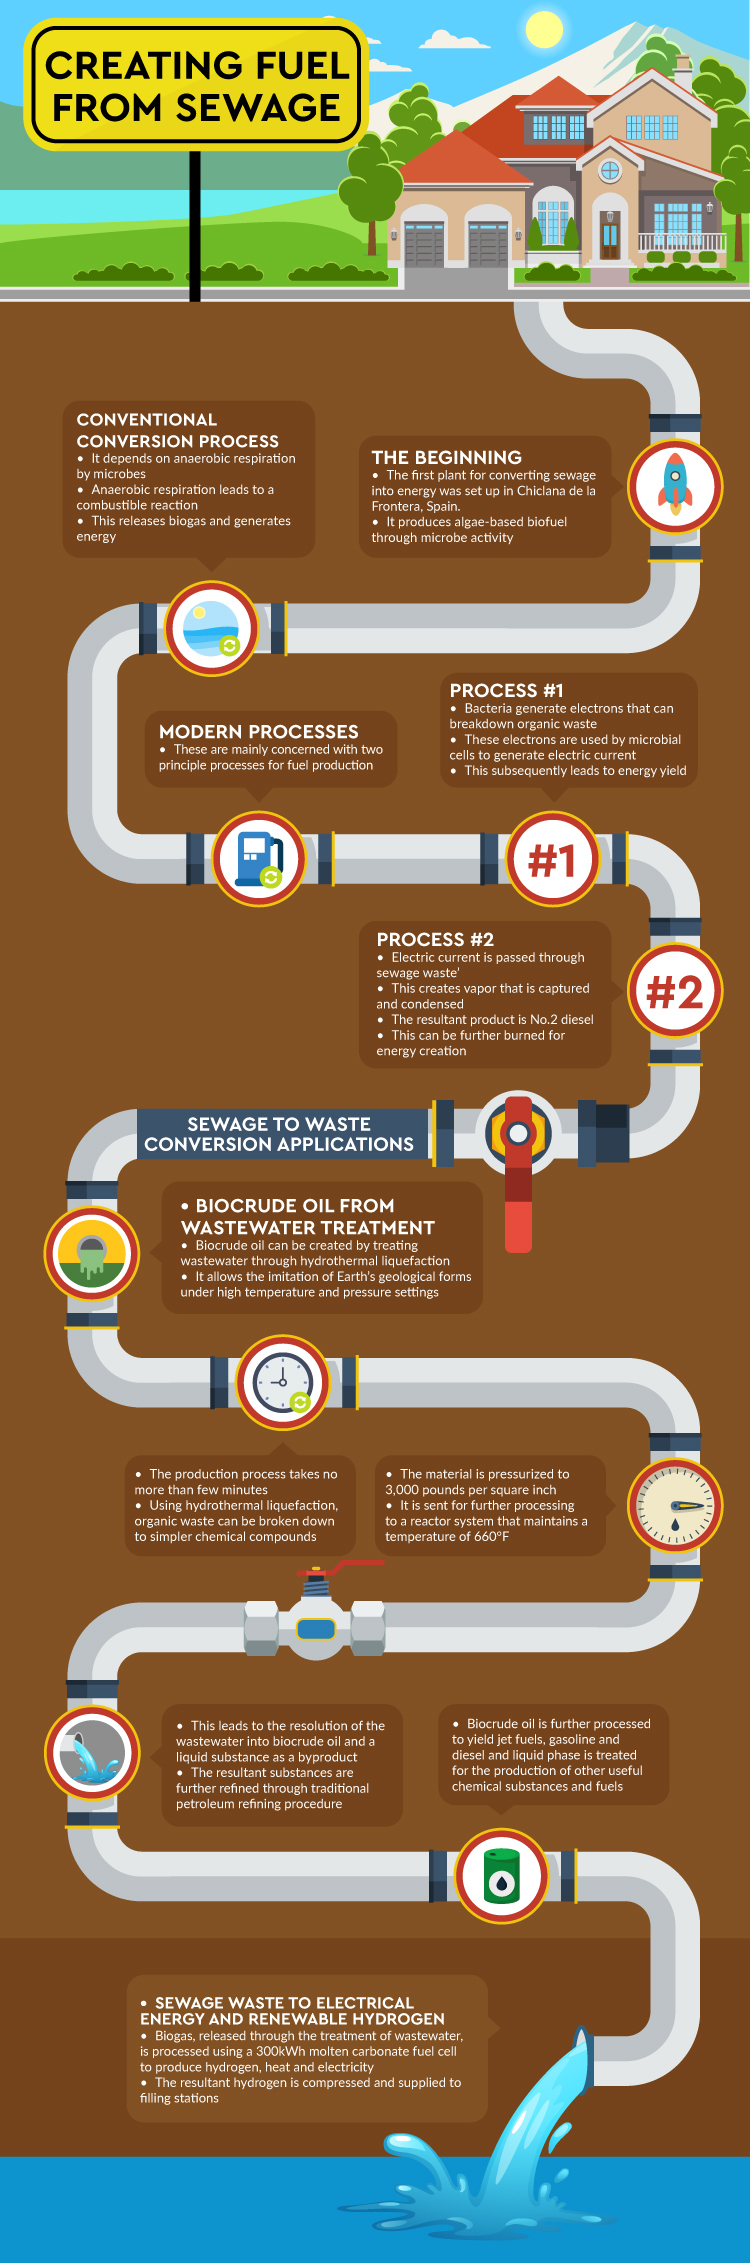 Creating Fuel From Sewage ||infographic design||infographic s||